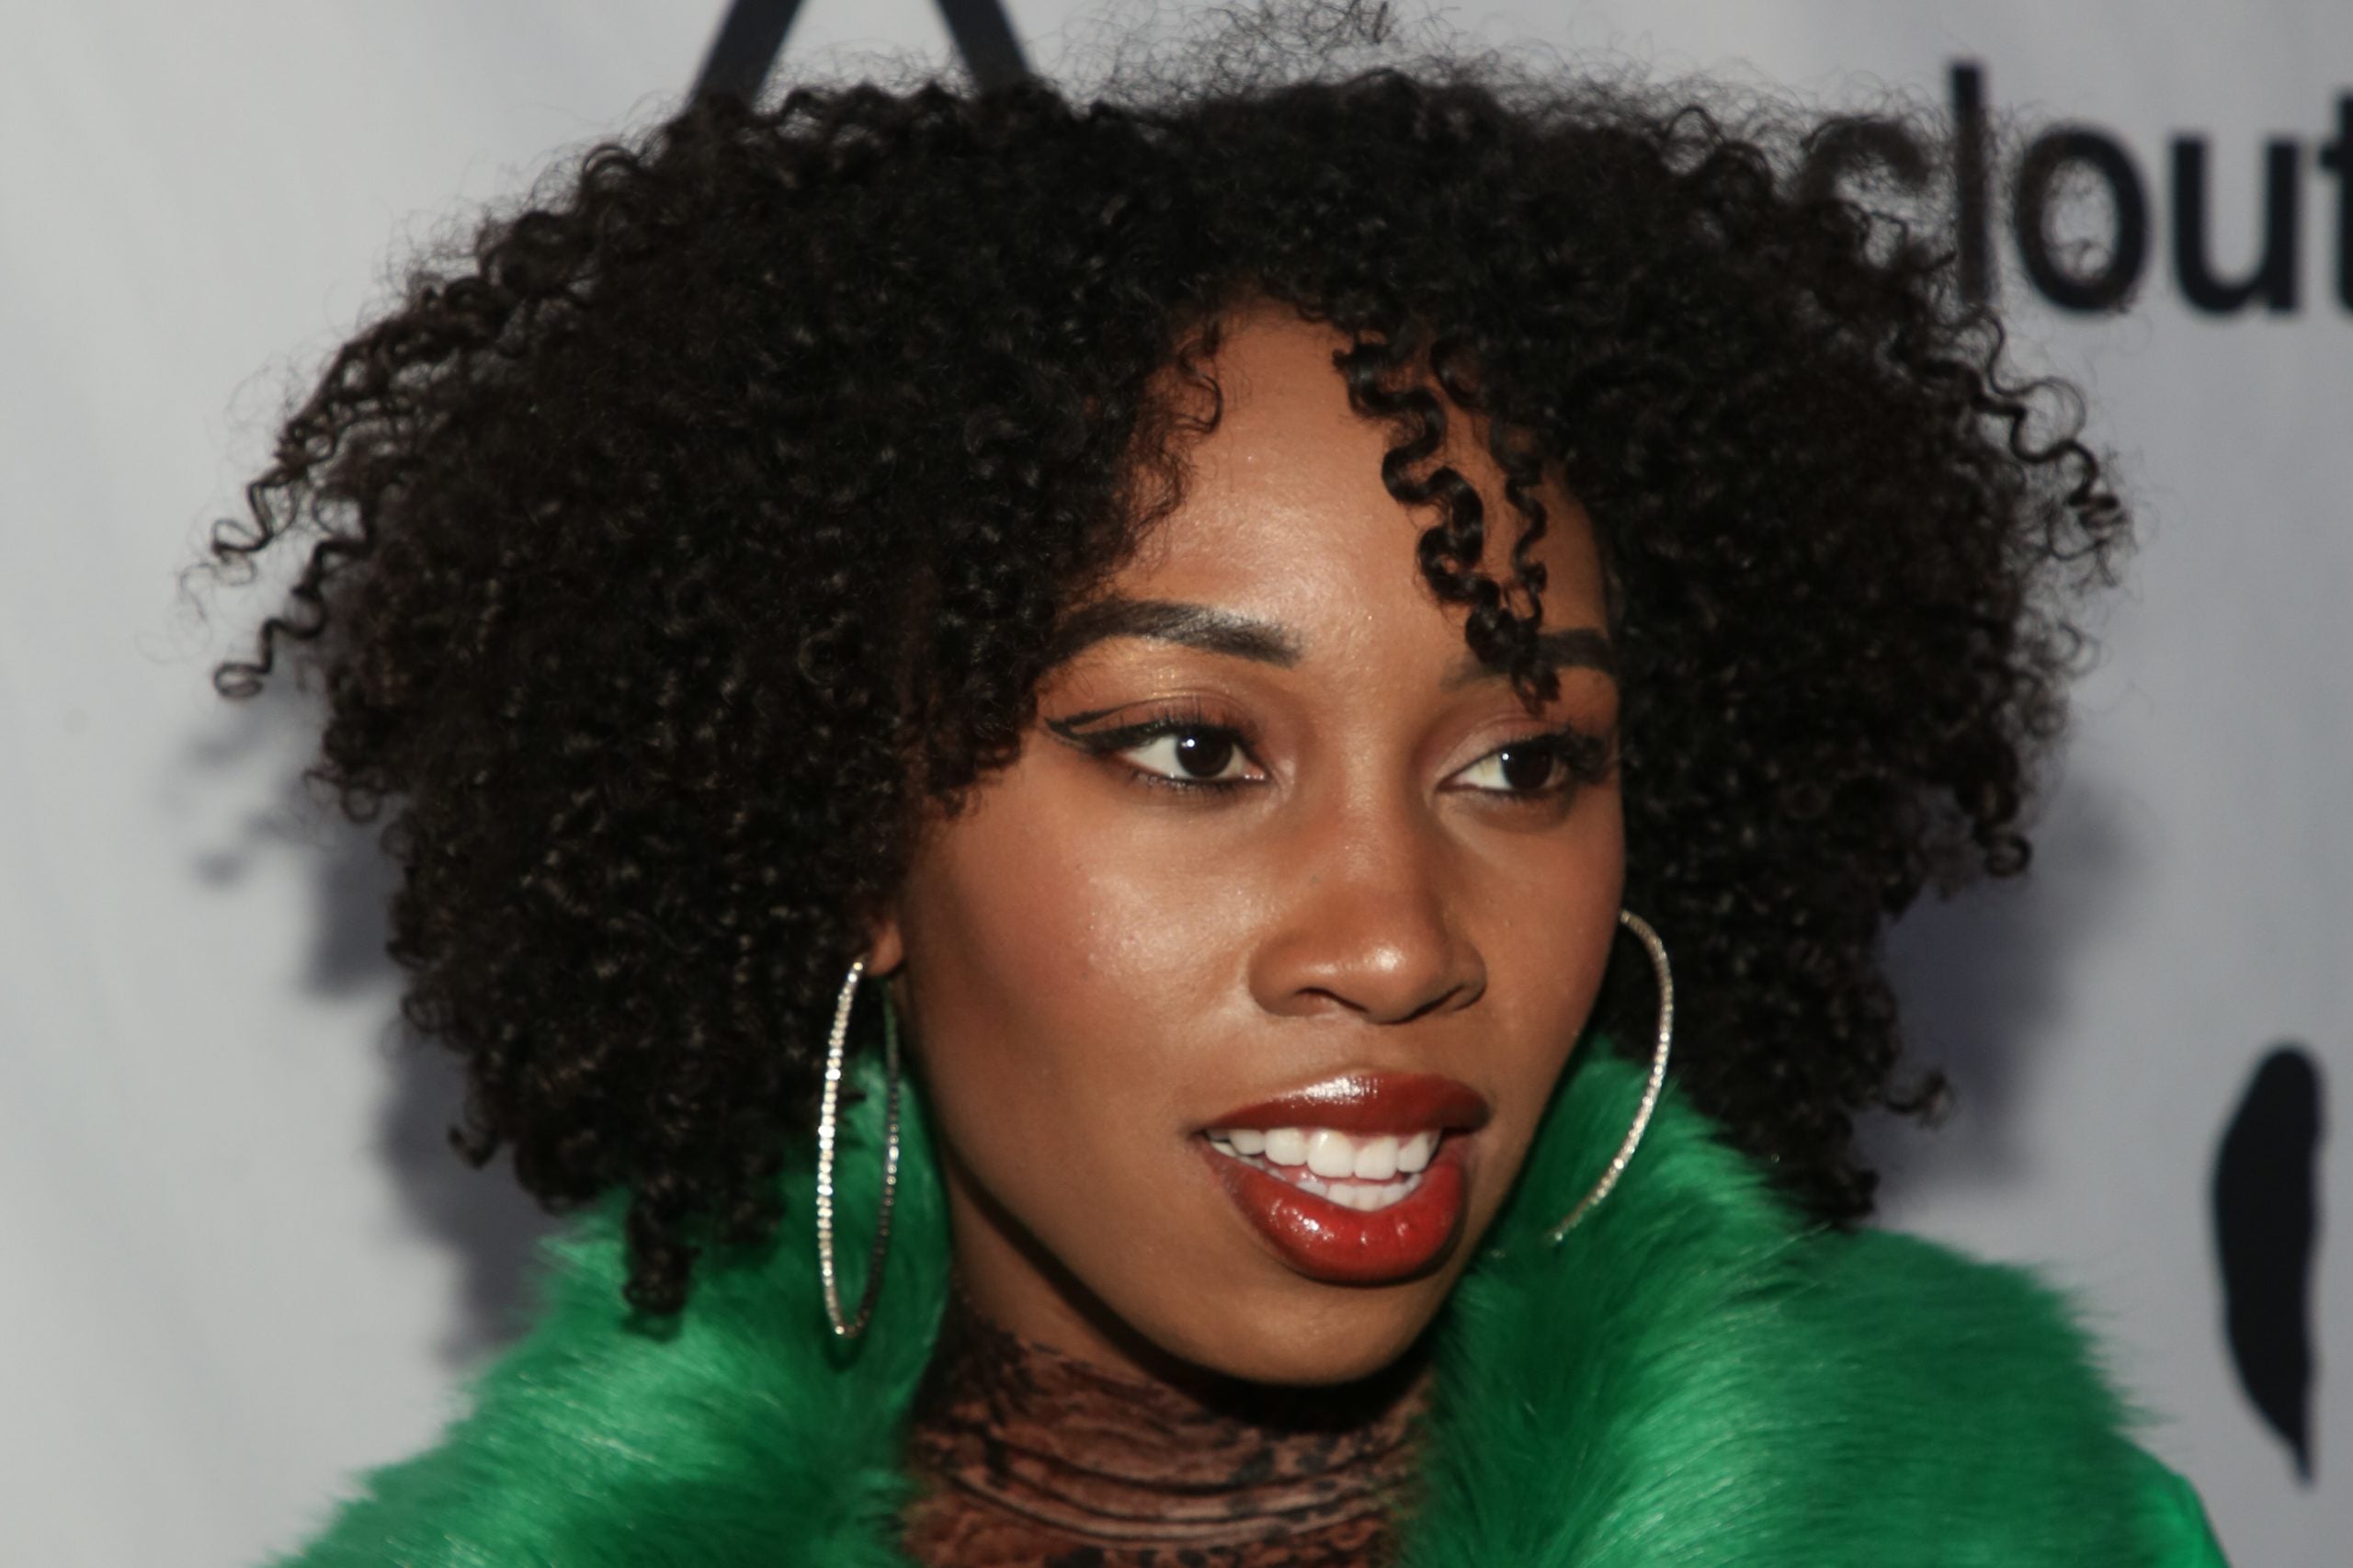 “Black Panther” Actress Sustained Severe Injuries From New Year’s Day Crash In New York City